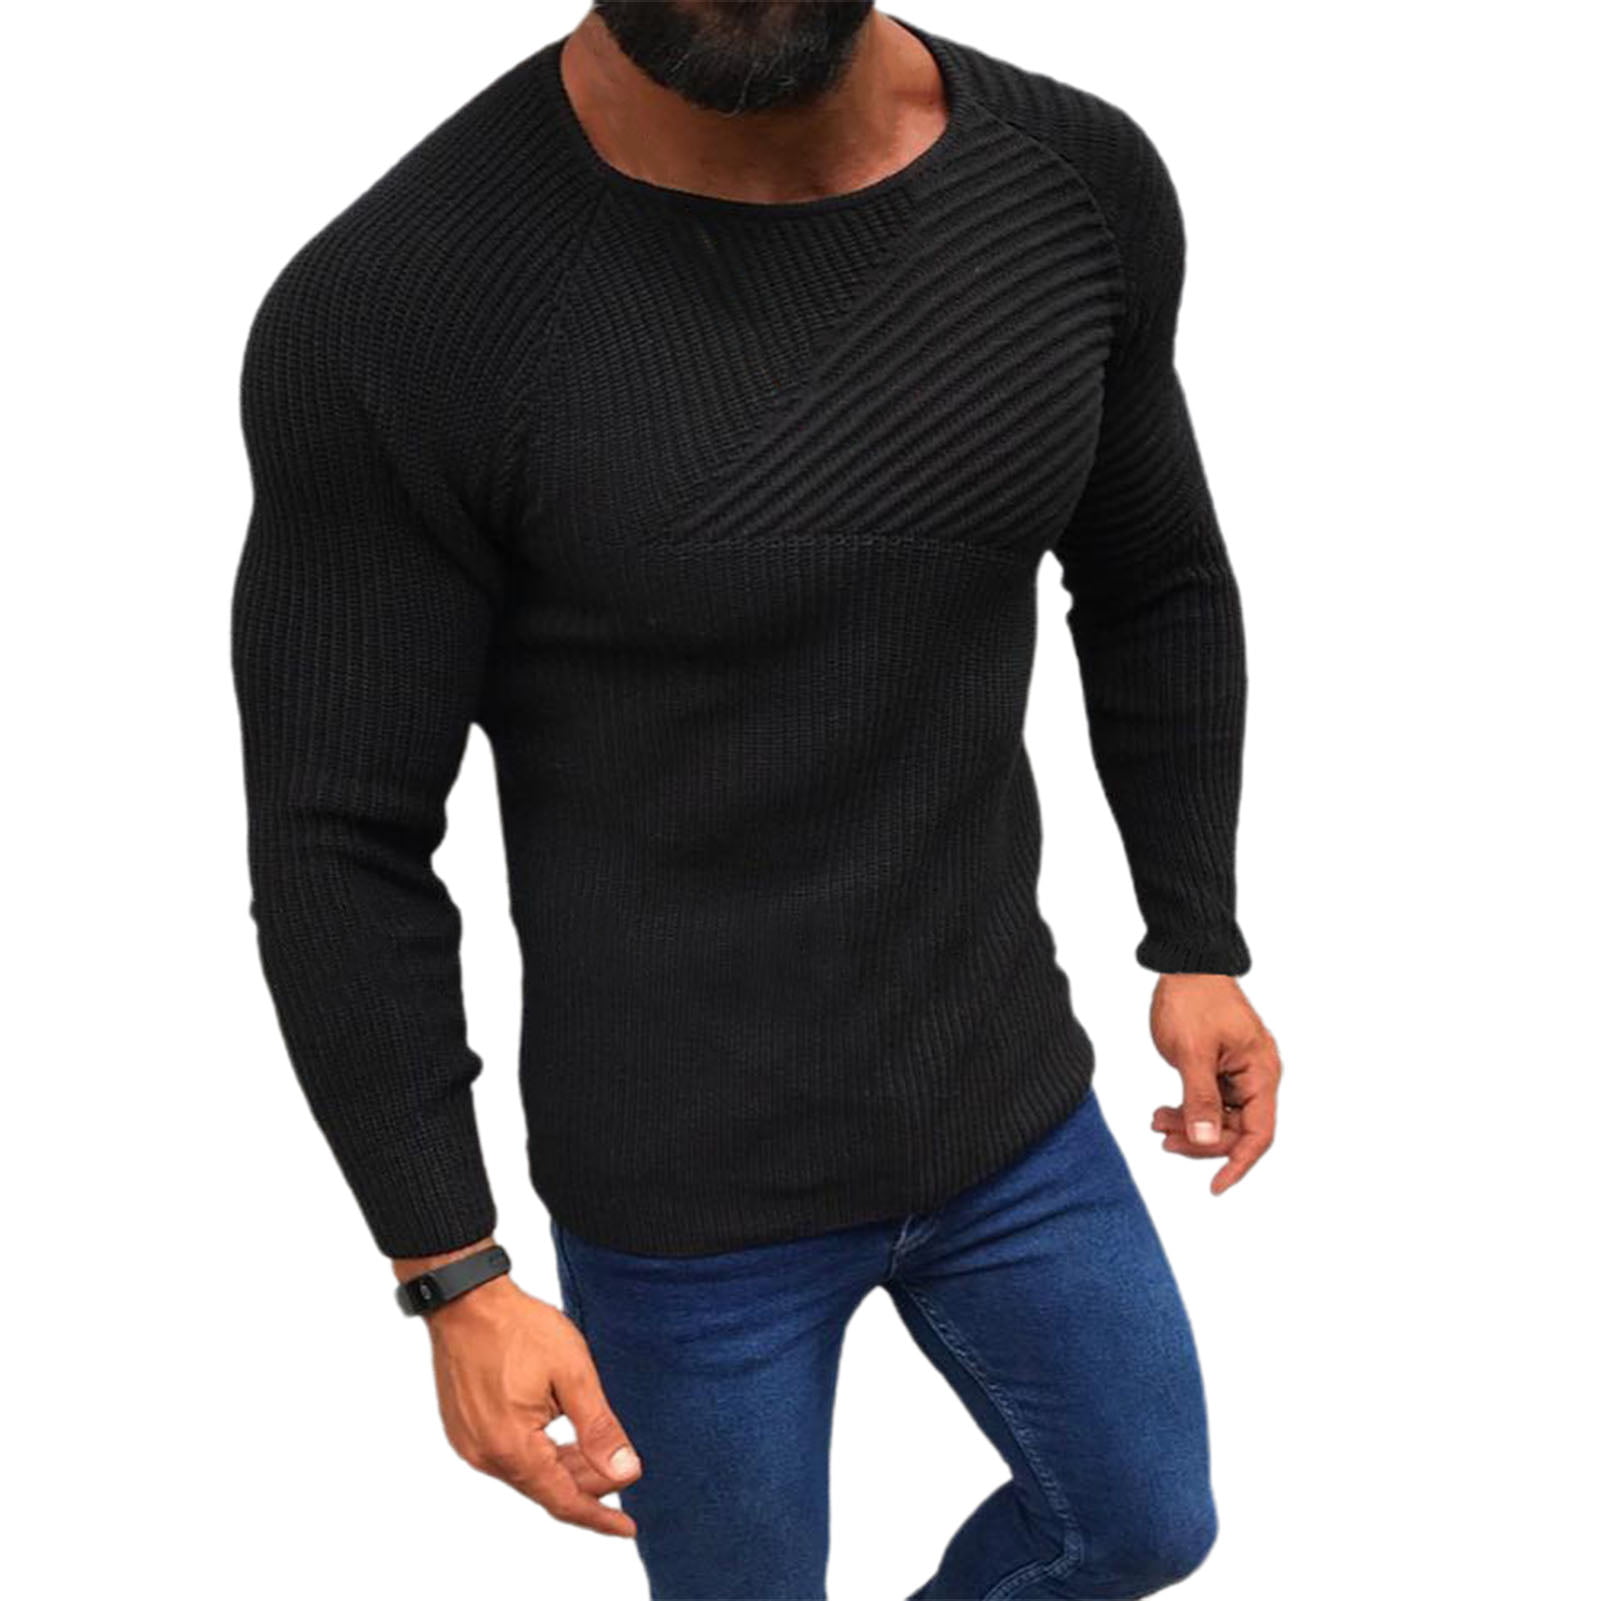 Nicelly Men Pullover Long-Sleeve Comfy Knit Splice Fit Crew Neck Sweaters 